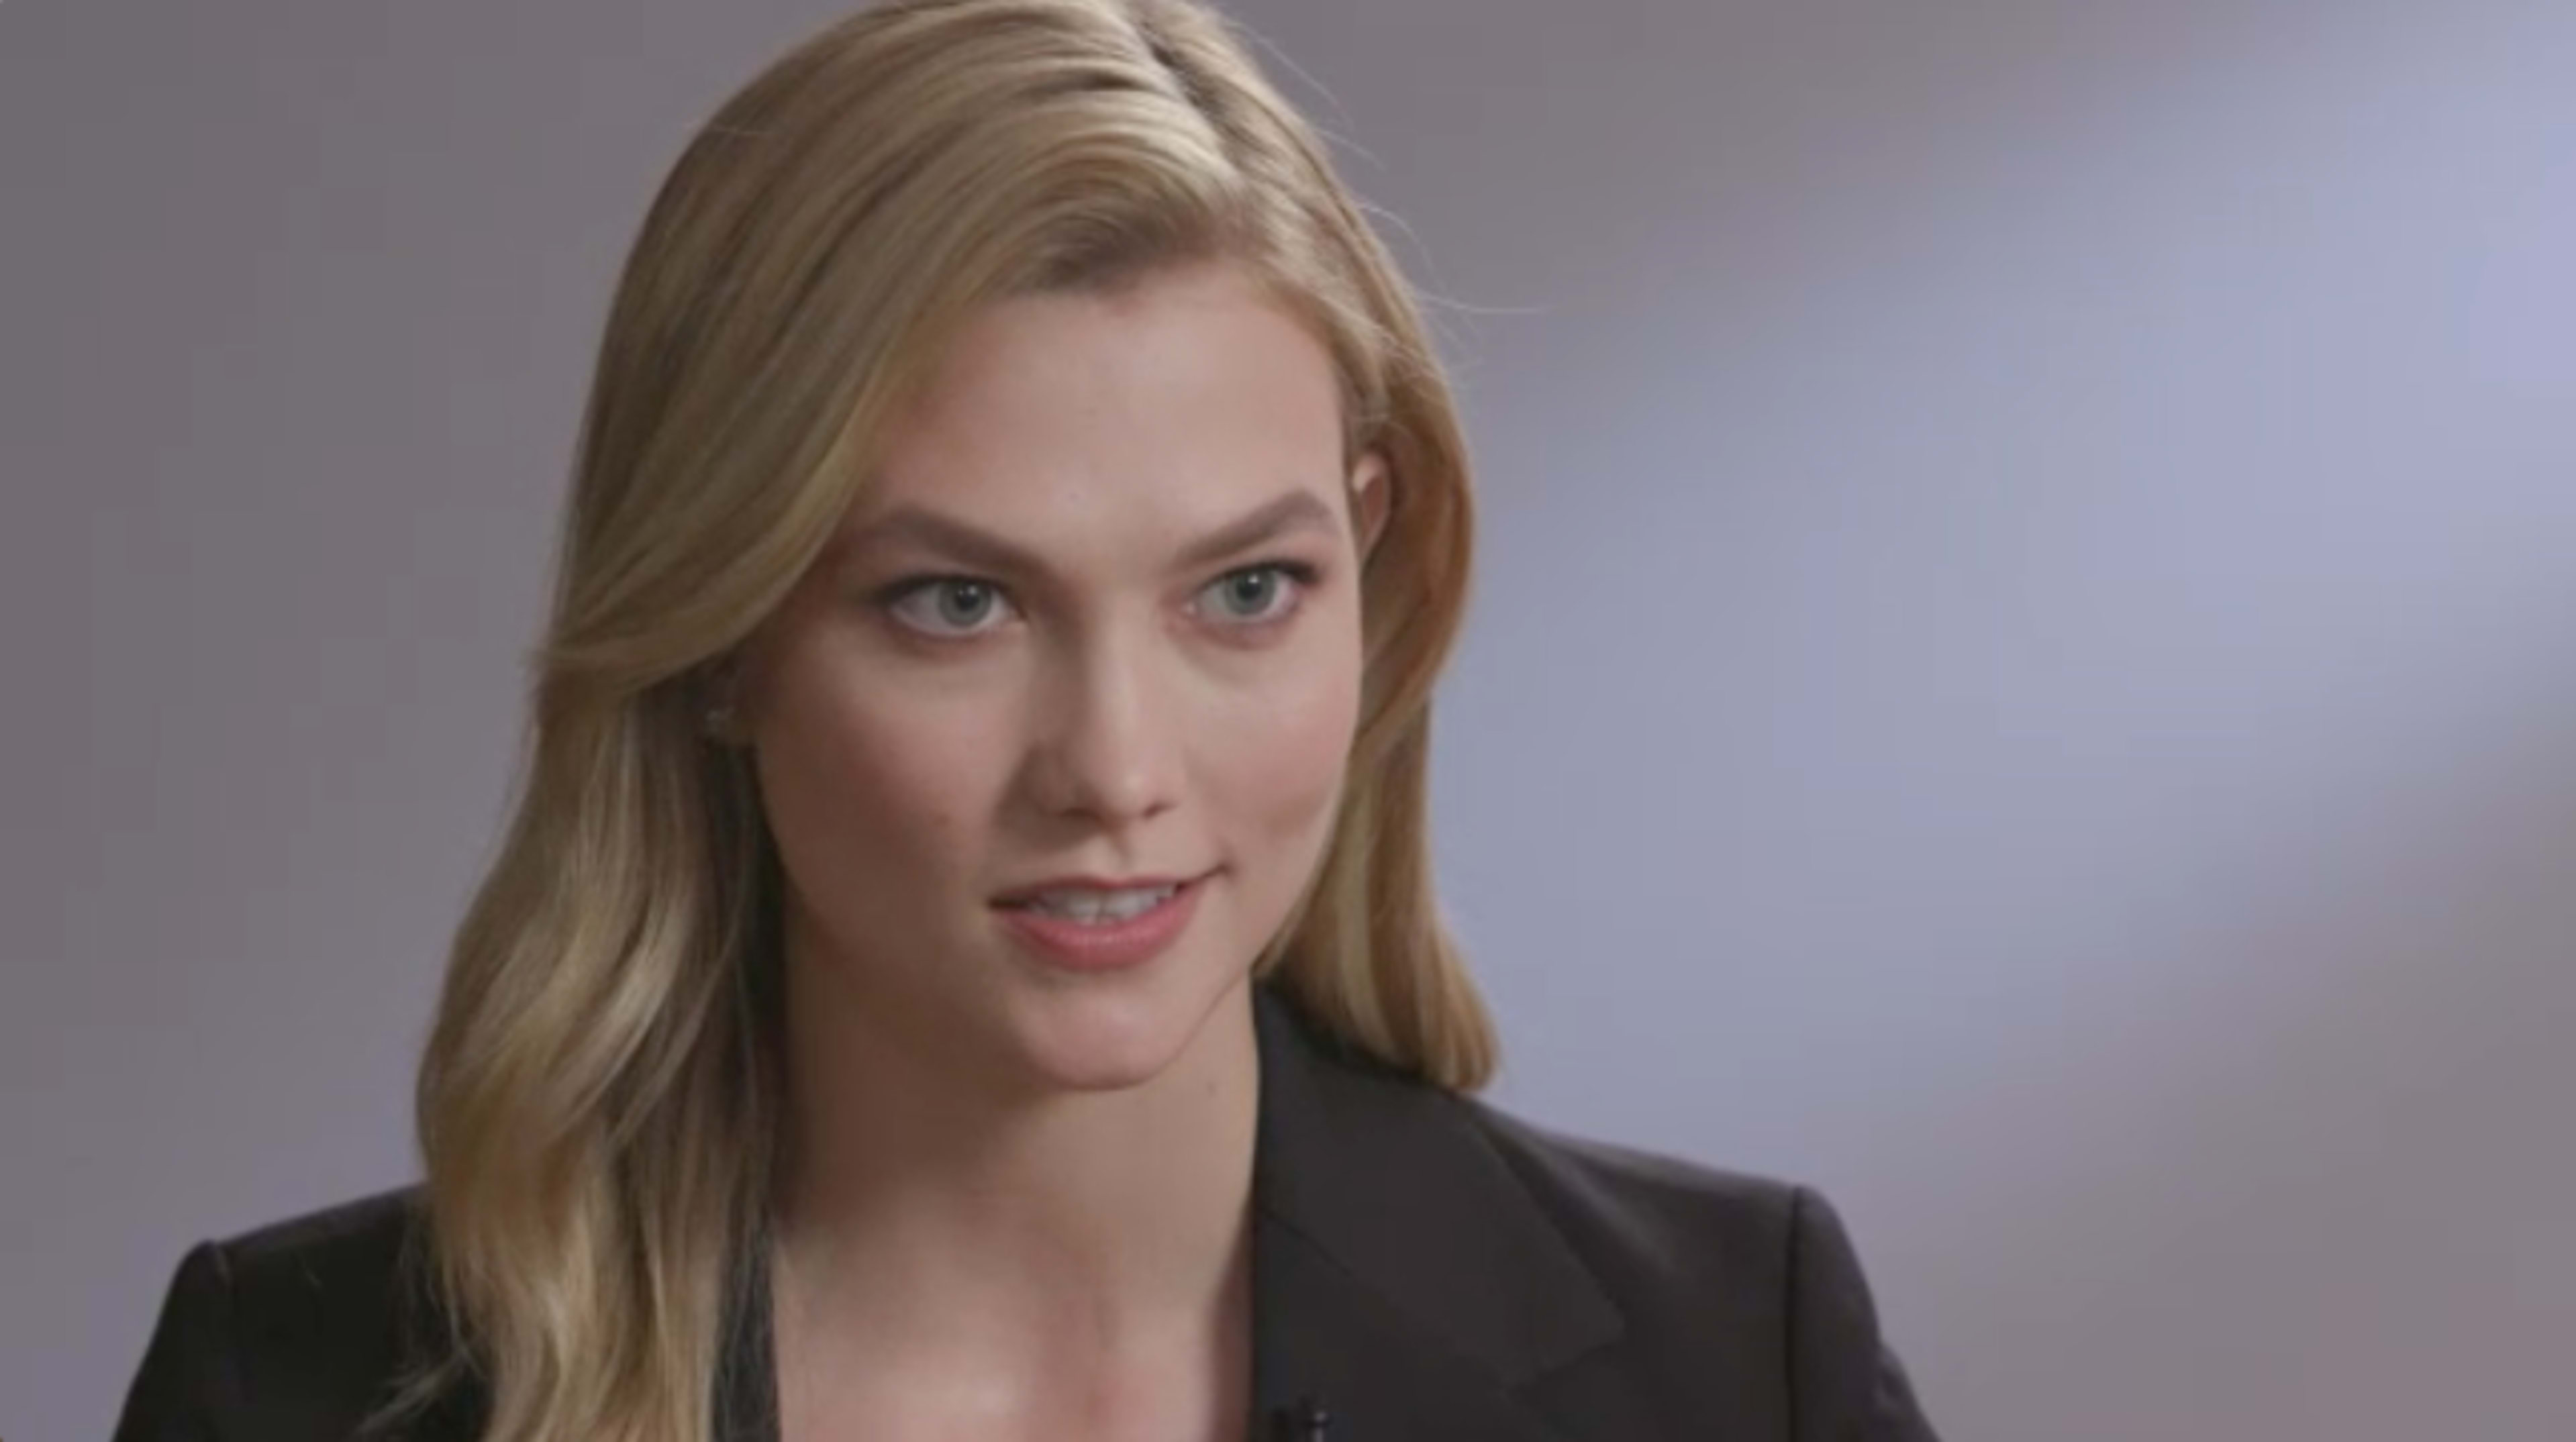 Karlie Kloss On How Social Media Has Impacted The World Of Fashion And Modeling